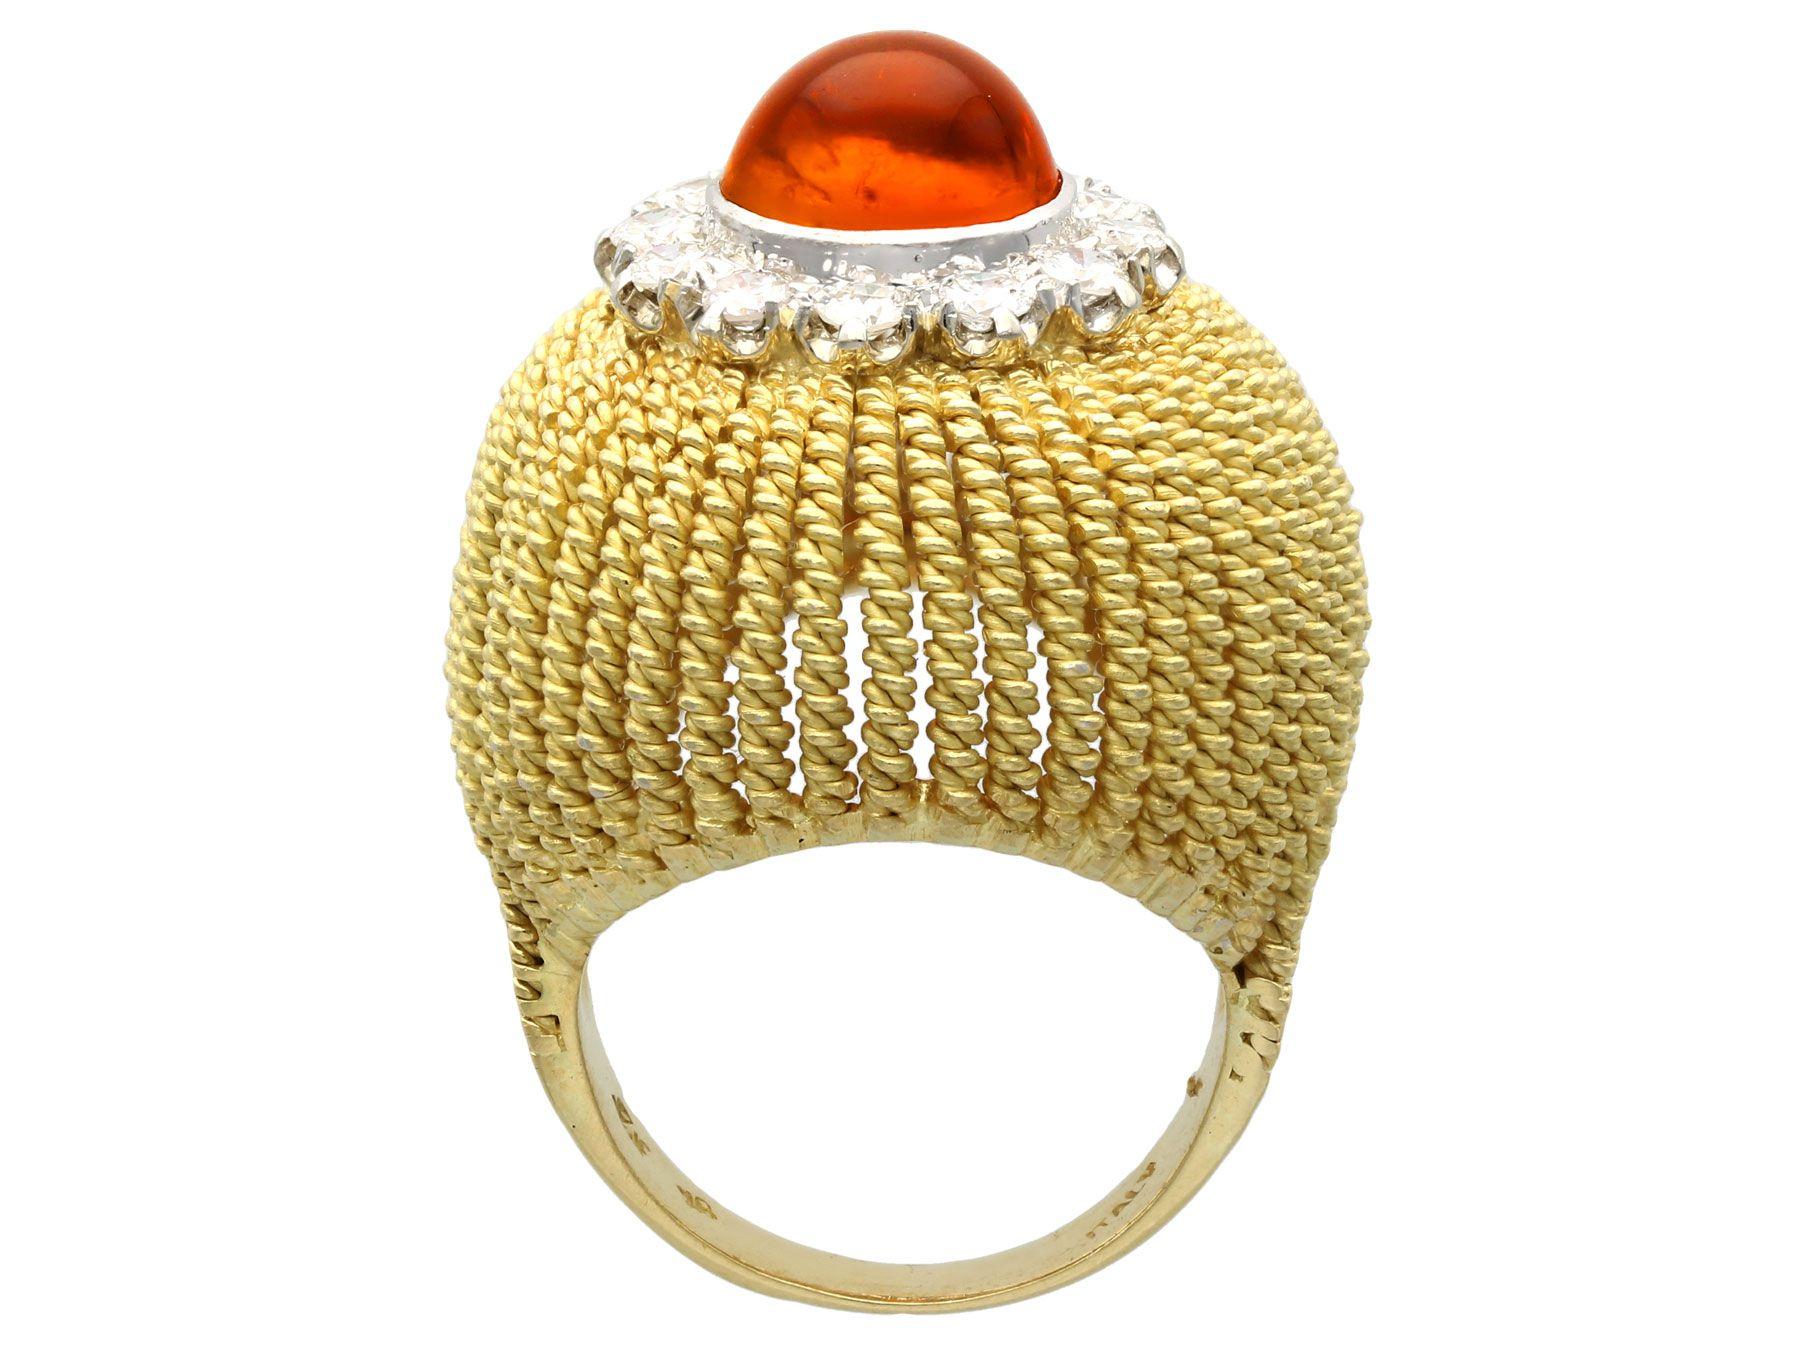 Vintage 2.48Ct Hessonite Garnet and 1.02 Carat Diamond Yellow Gold Cocktail Ring For Sale 1